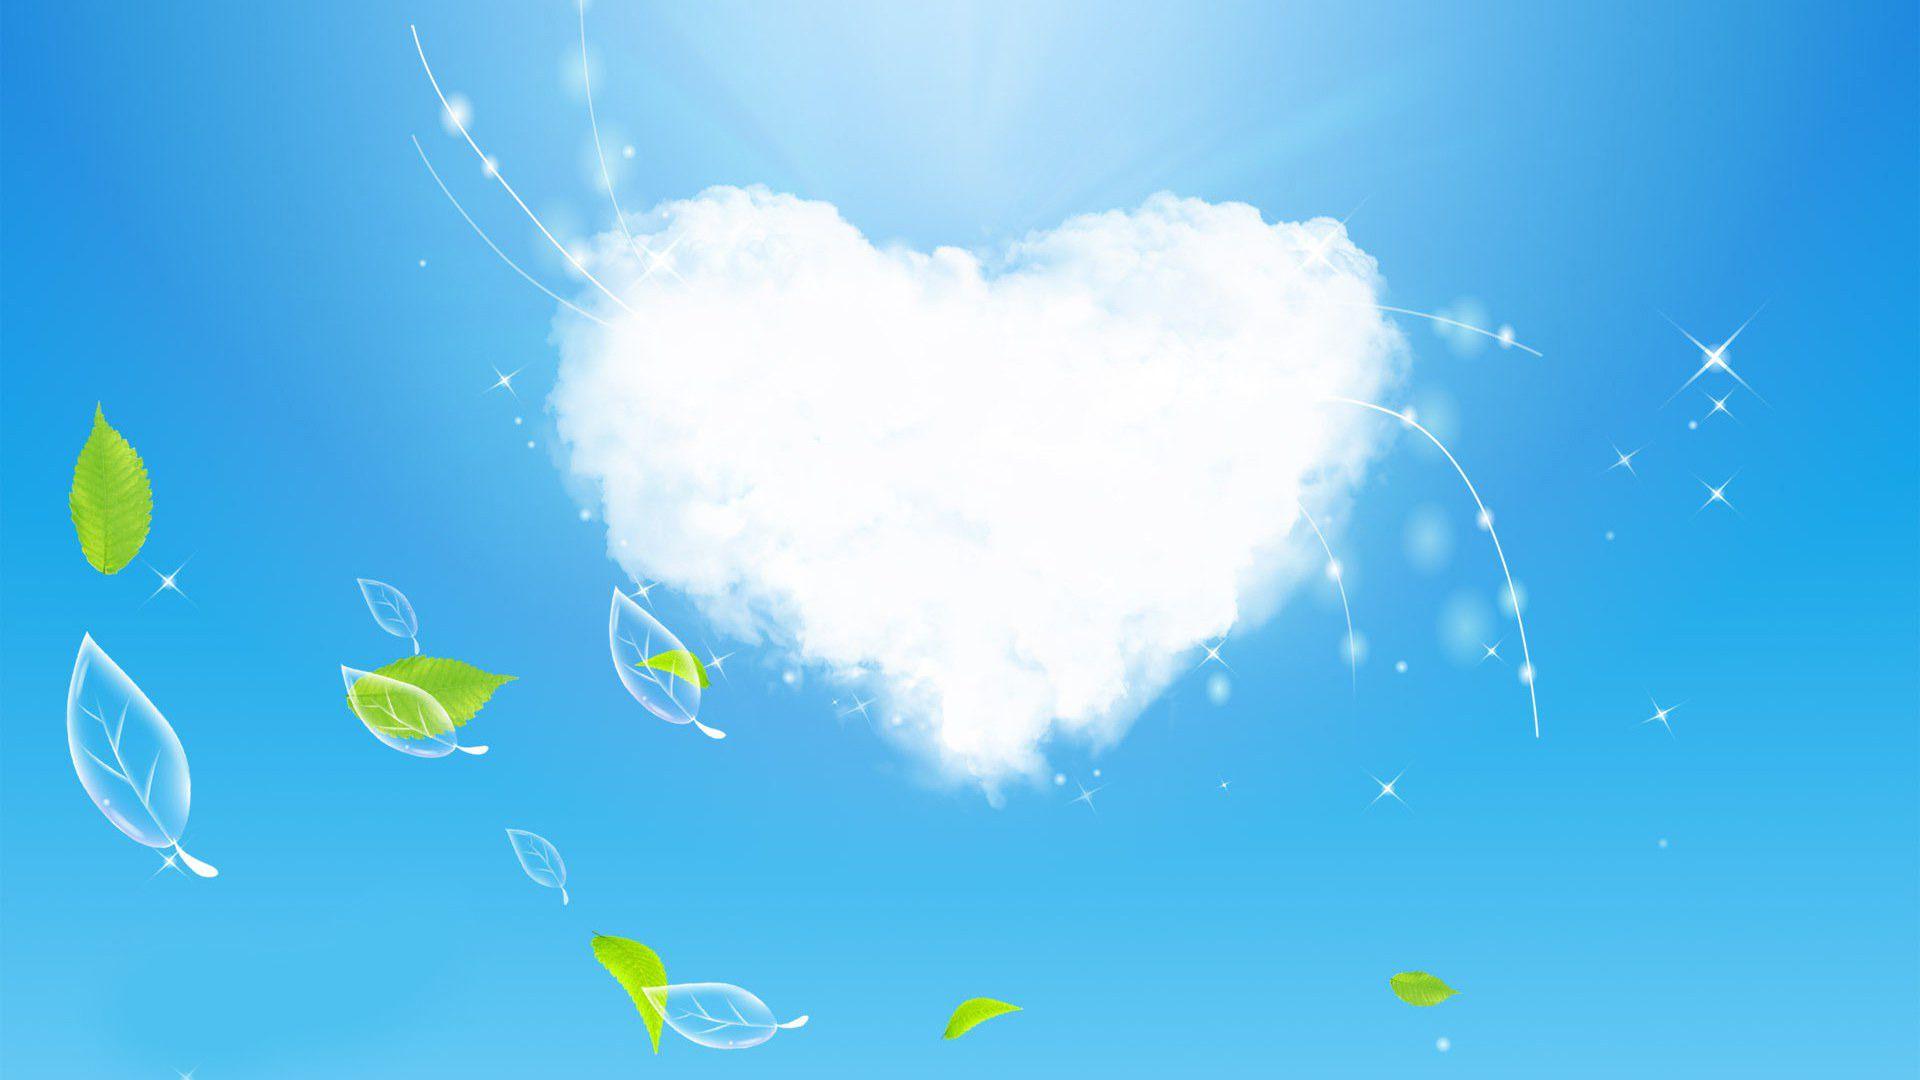 Hearts in Clouds Wallpaper